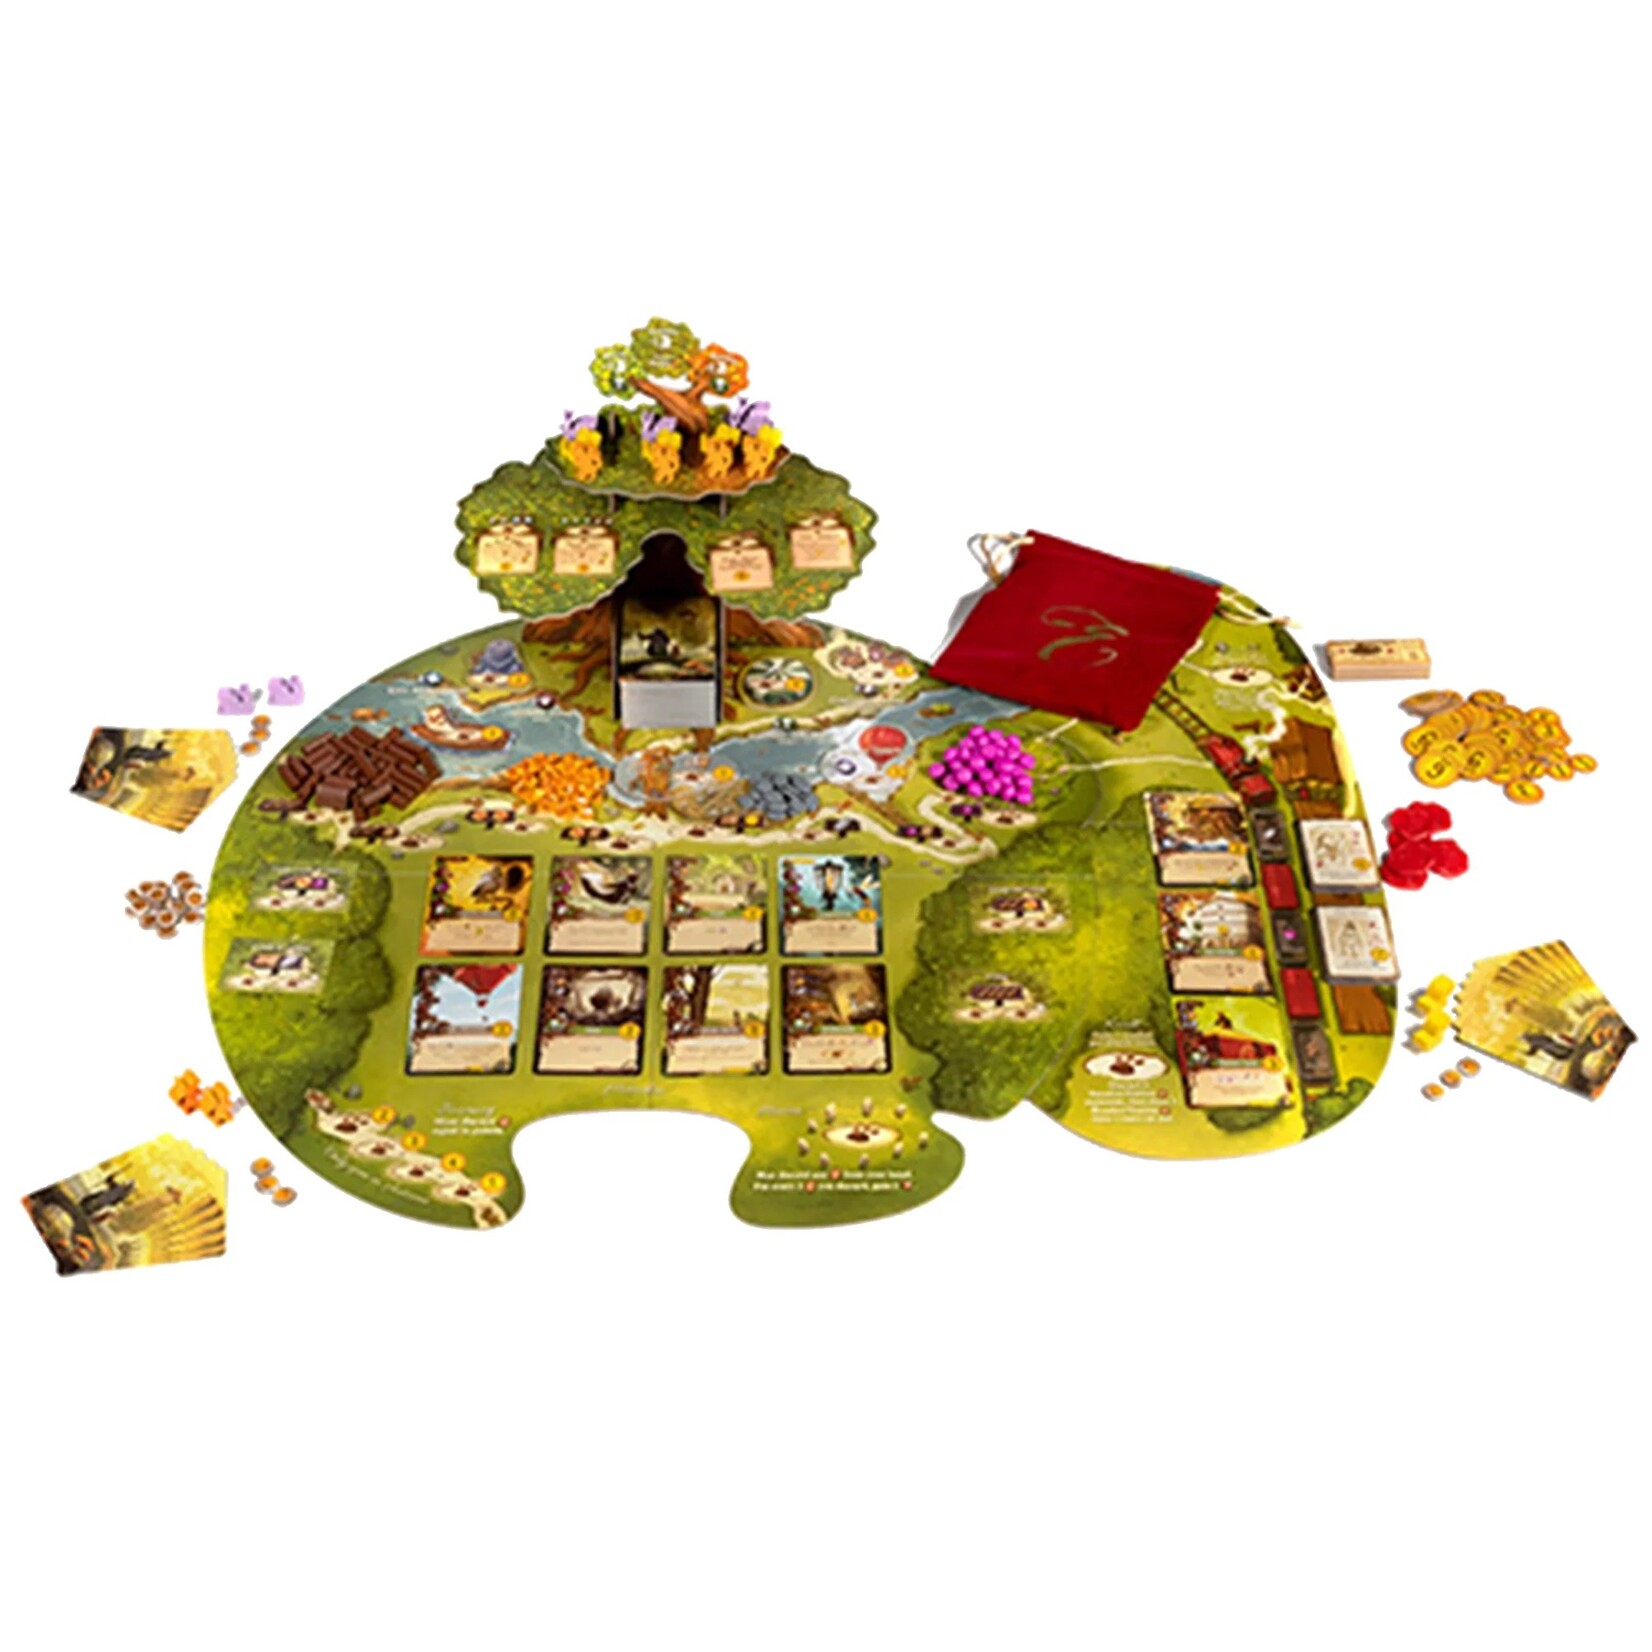 Tabletop Tycoon Everdell: Newleaf